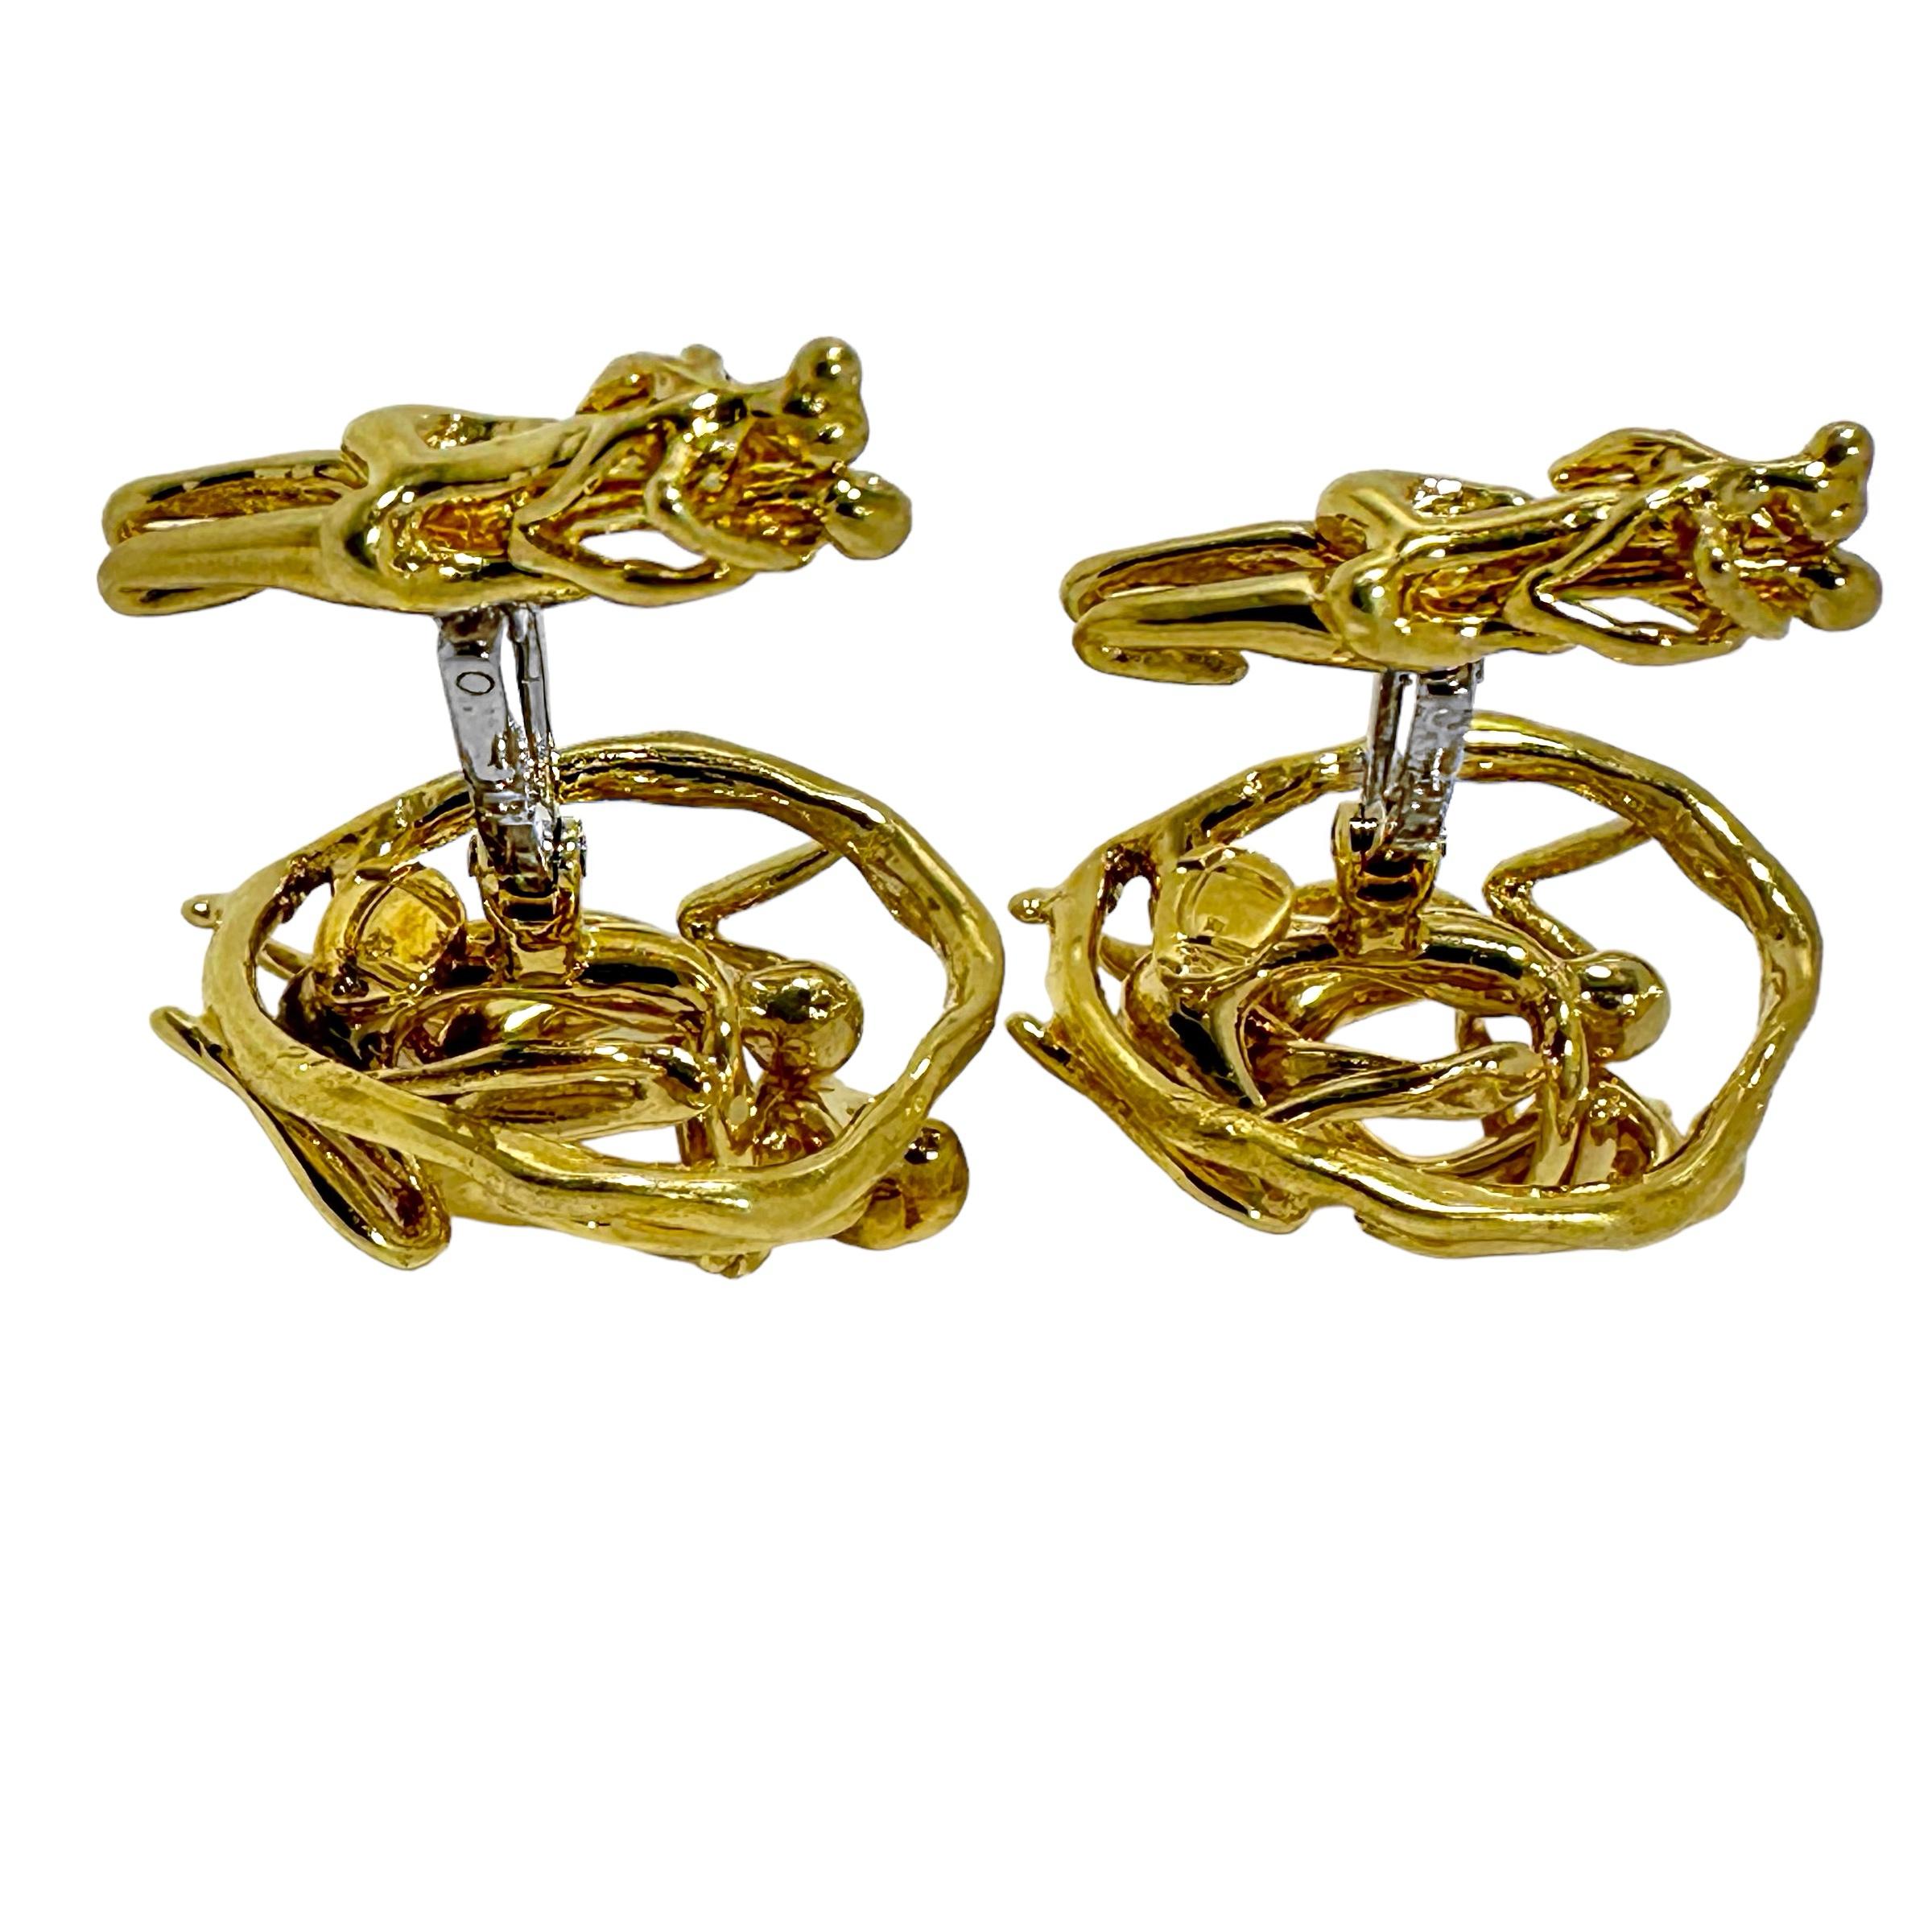 Mid-20th Century French 18k Yellow Gold Artisan Hand Crafted Erotic Cuff Links For Sale 3